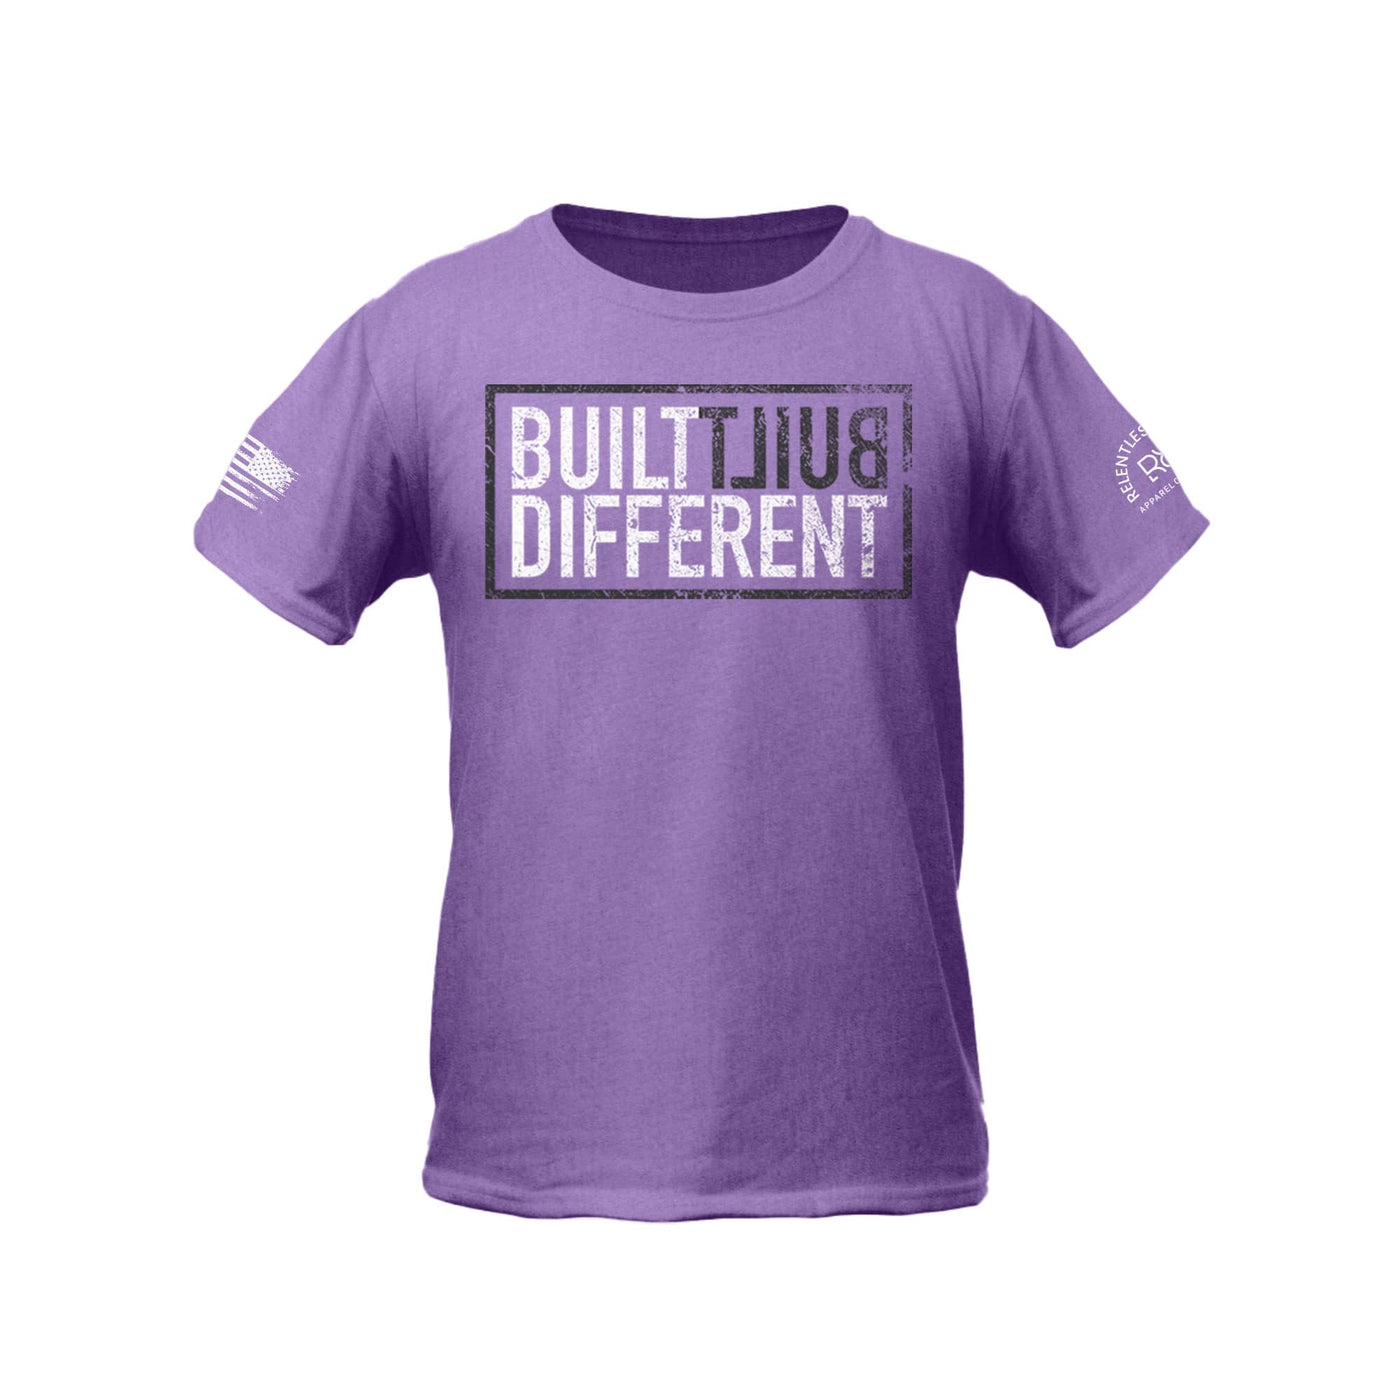 Built Different Youth front design heather purple tee